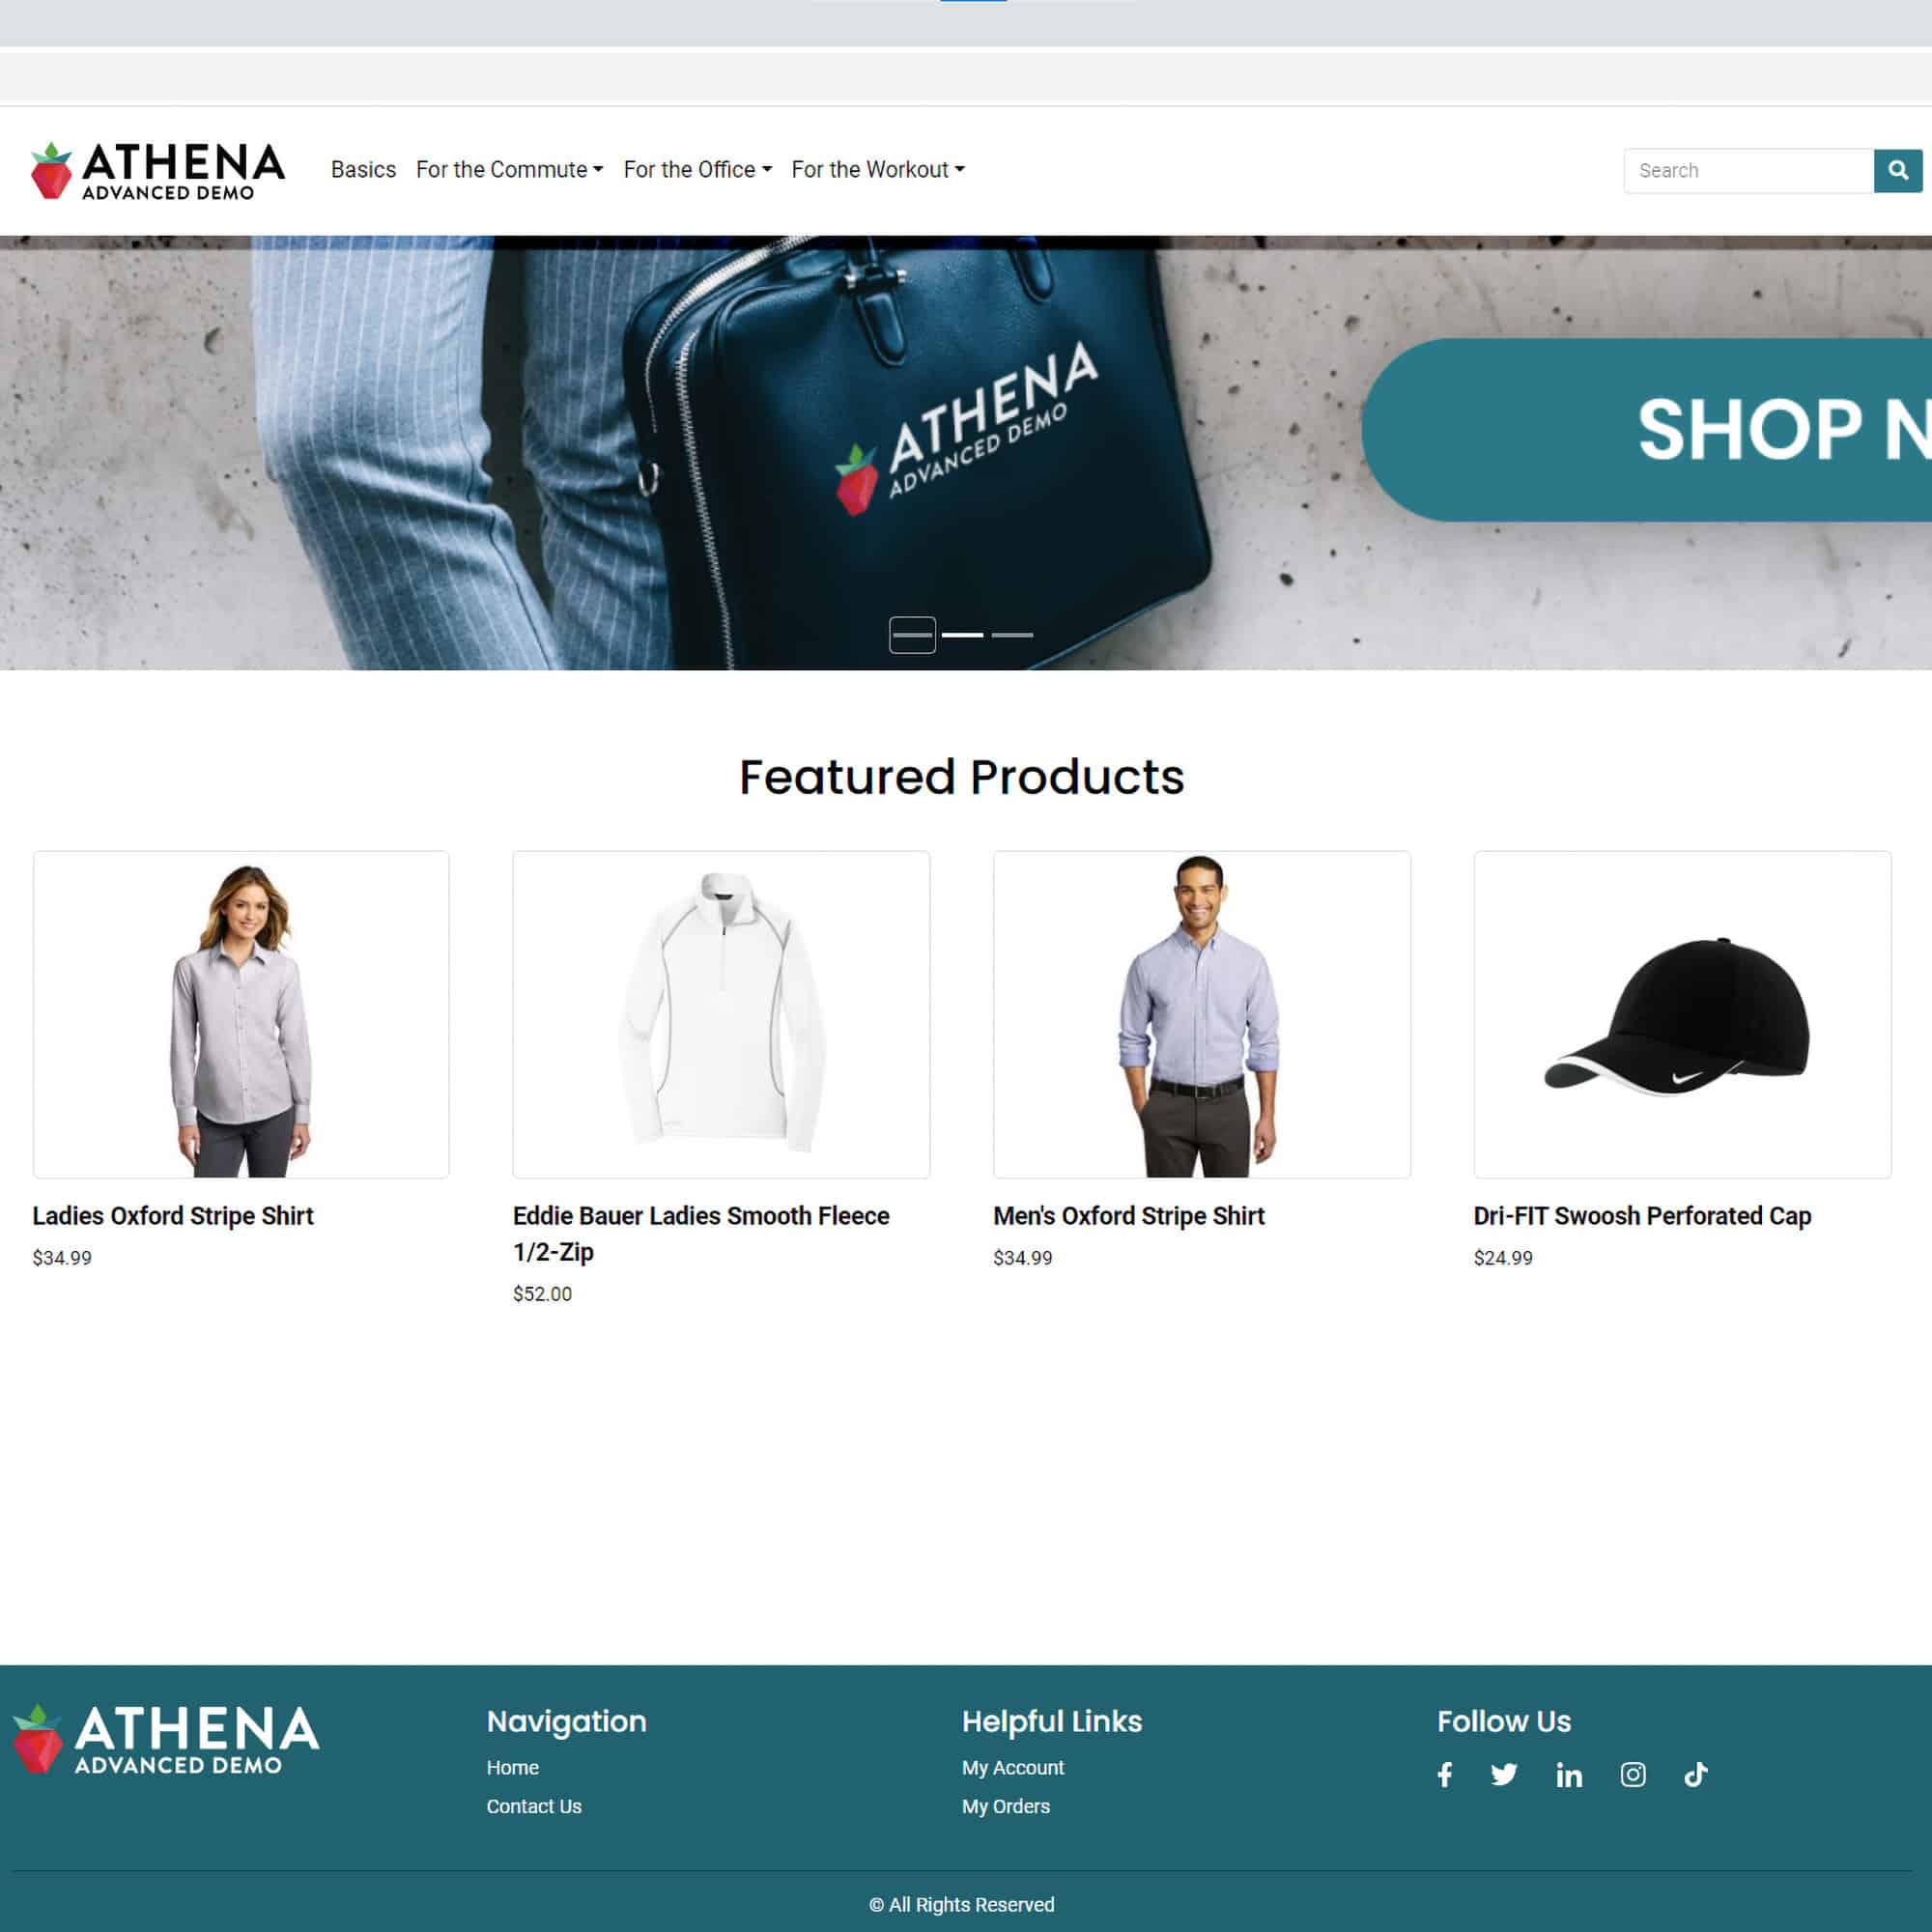 A store page for ahena products.